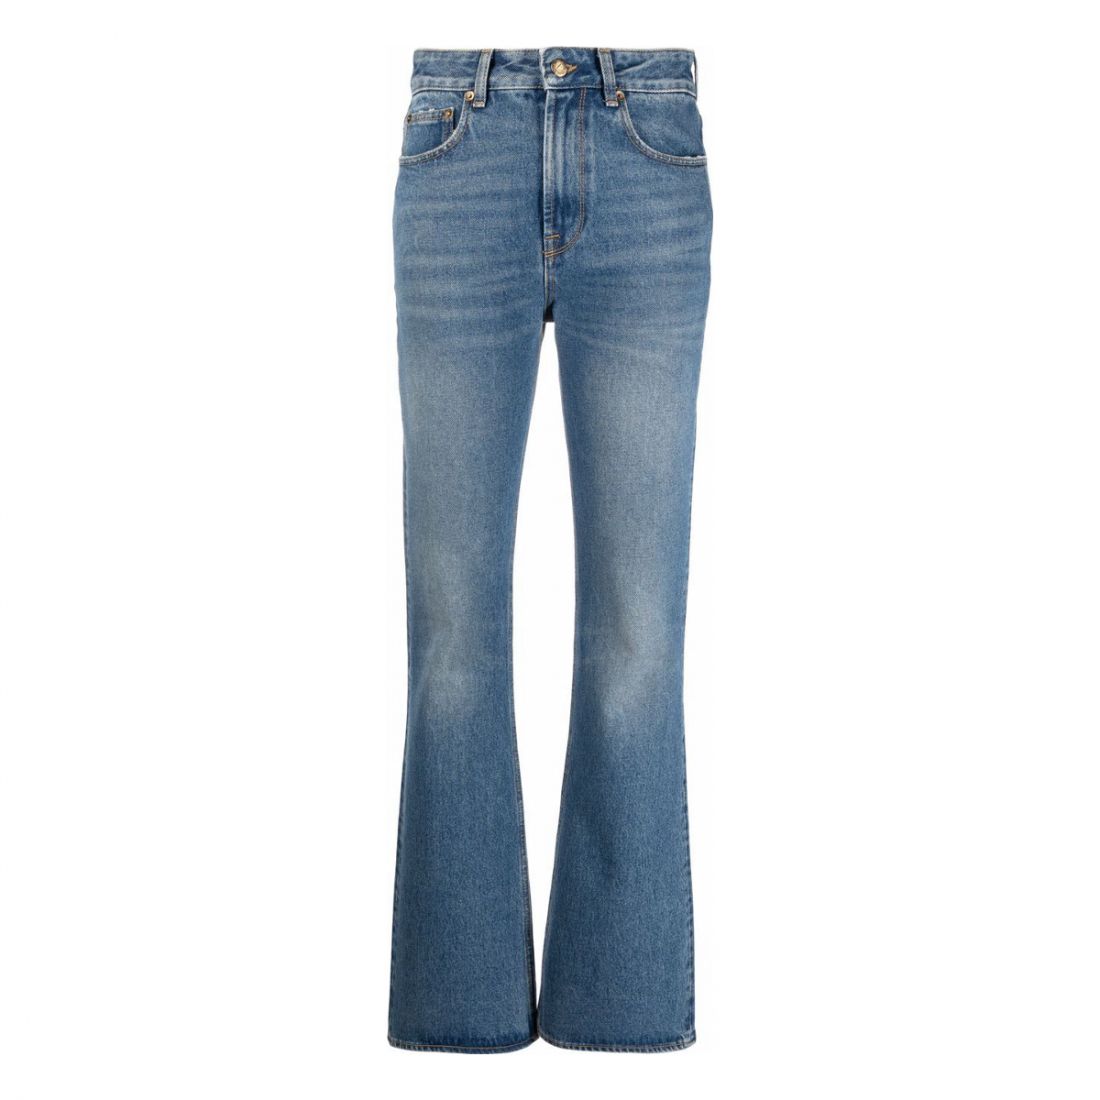 Golden Goose Deluxe Brand - Jeans 'Distressed' pour Femmes